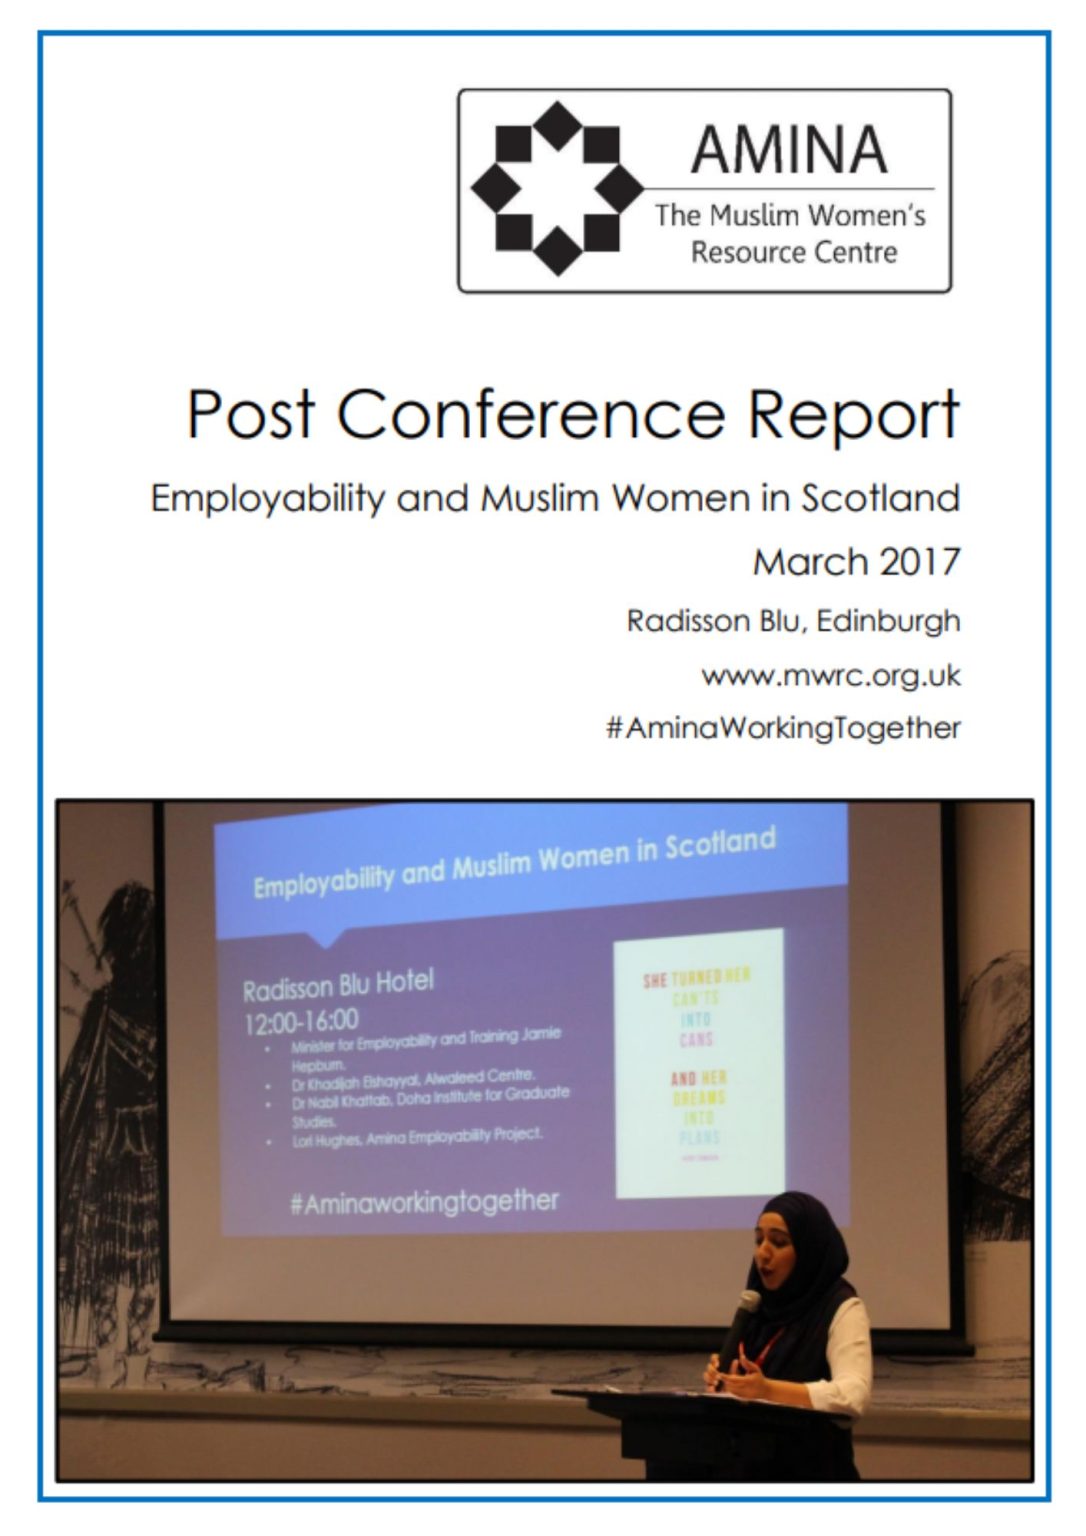 amina-resources-post conference